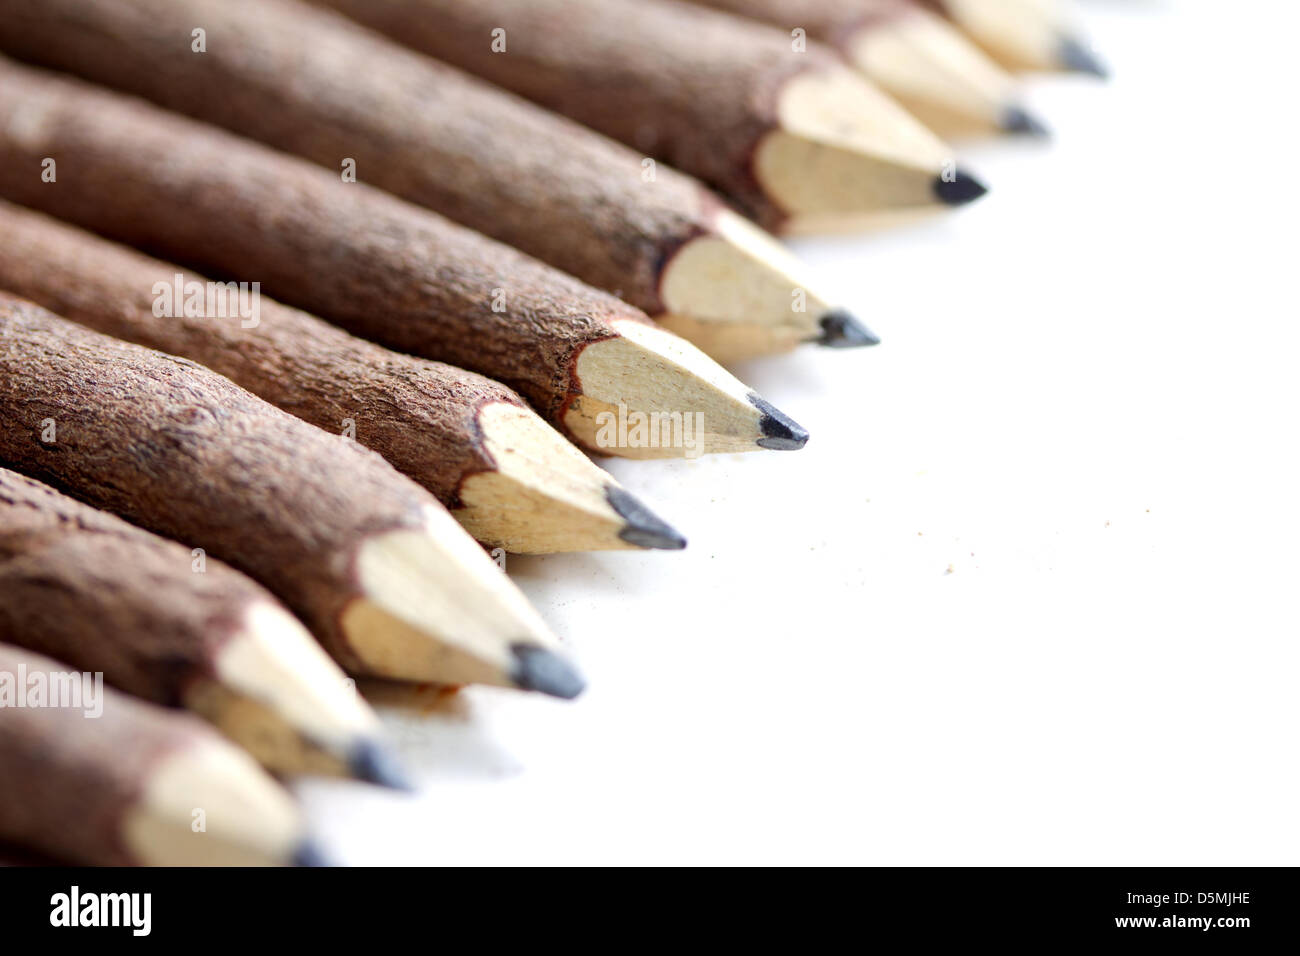 wooden lead pencil Stock Photo